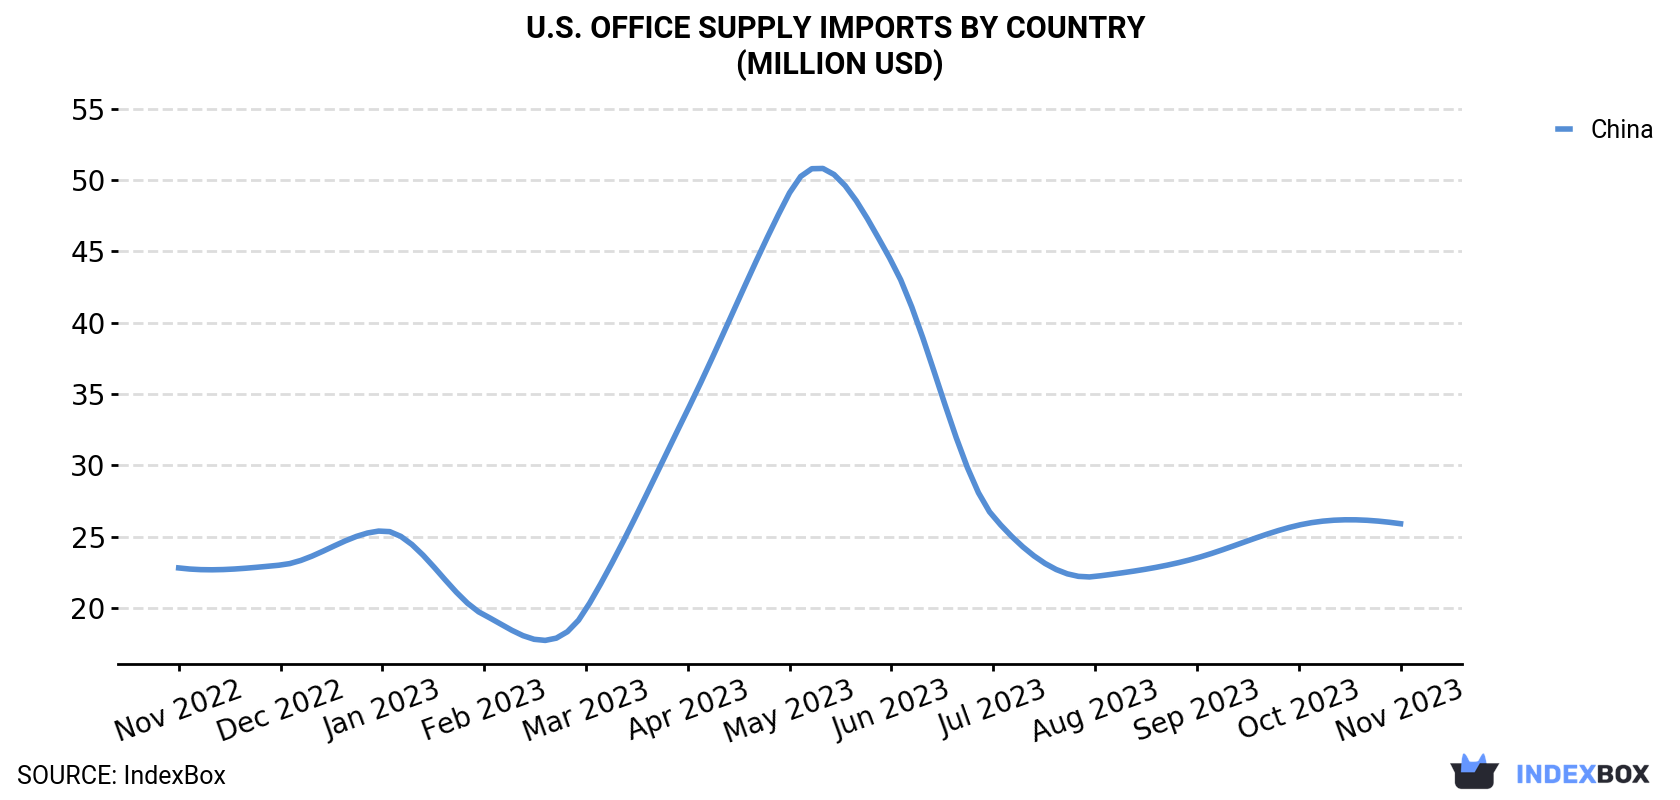 U.S. Office Supply Imports By Country (Million USD)